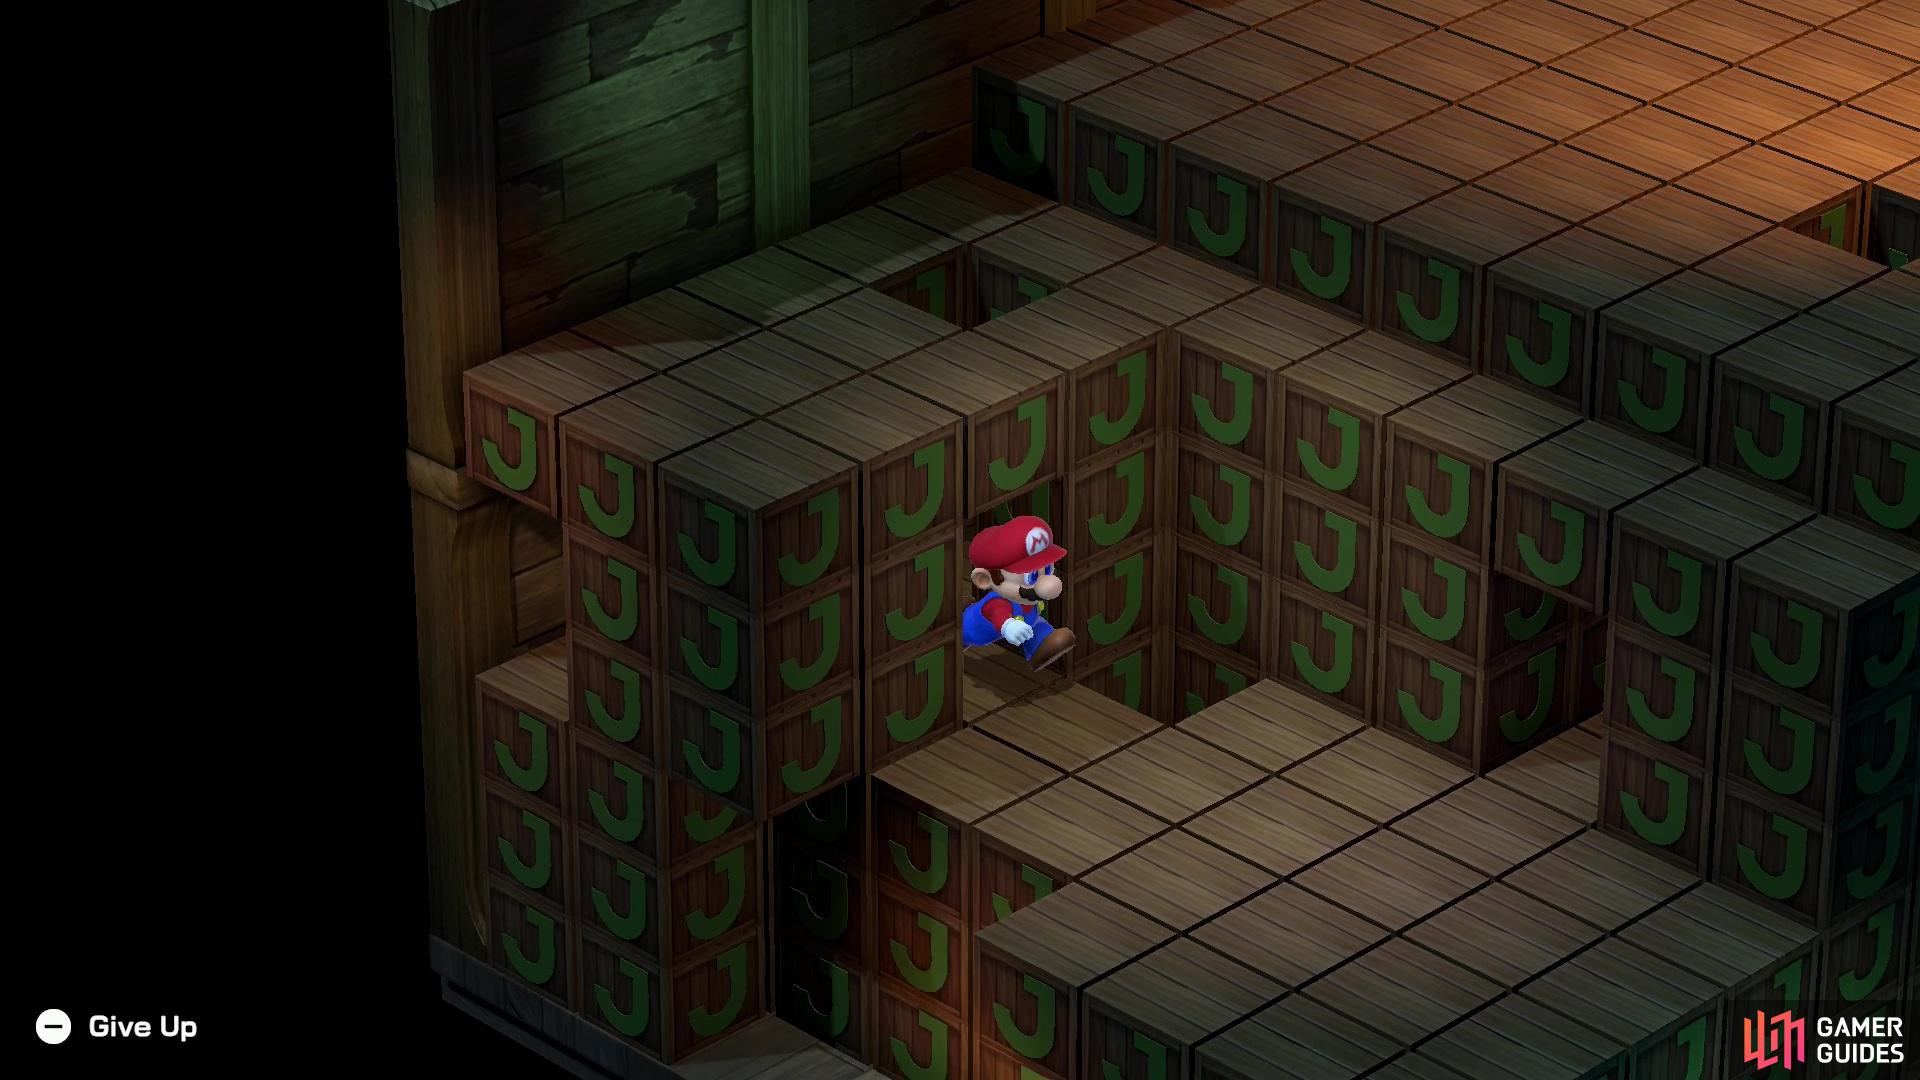 Turn southwest and navigate around a corner, then continue southwest until you spot Mario near another opening in the maze.